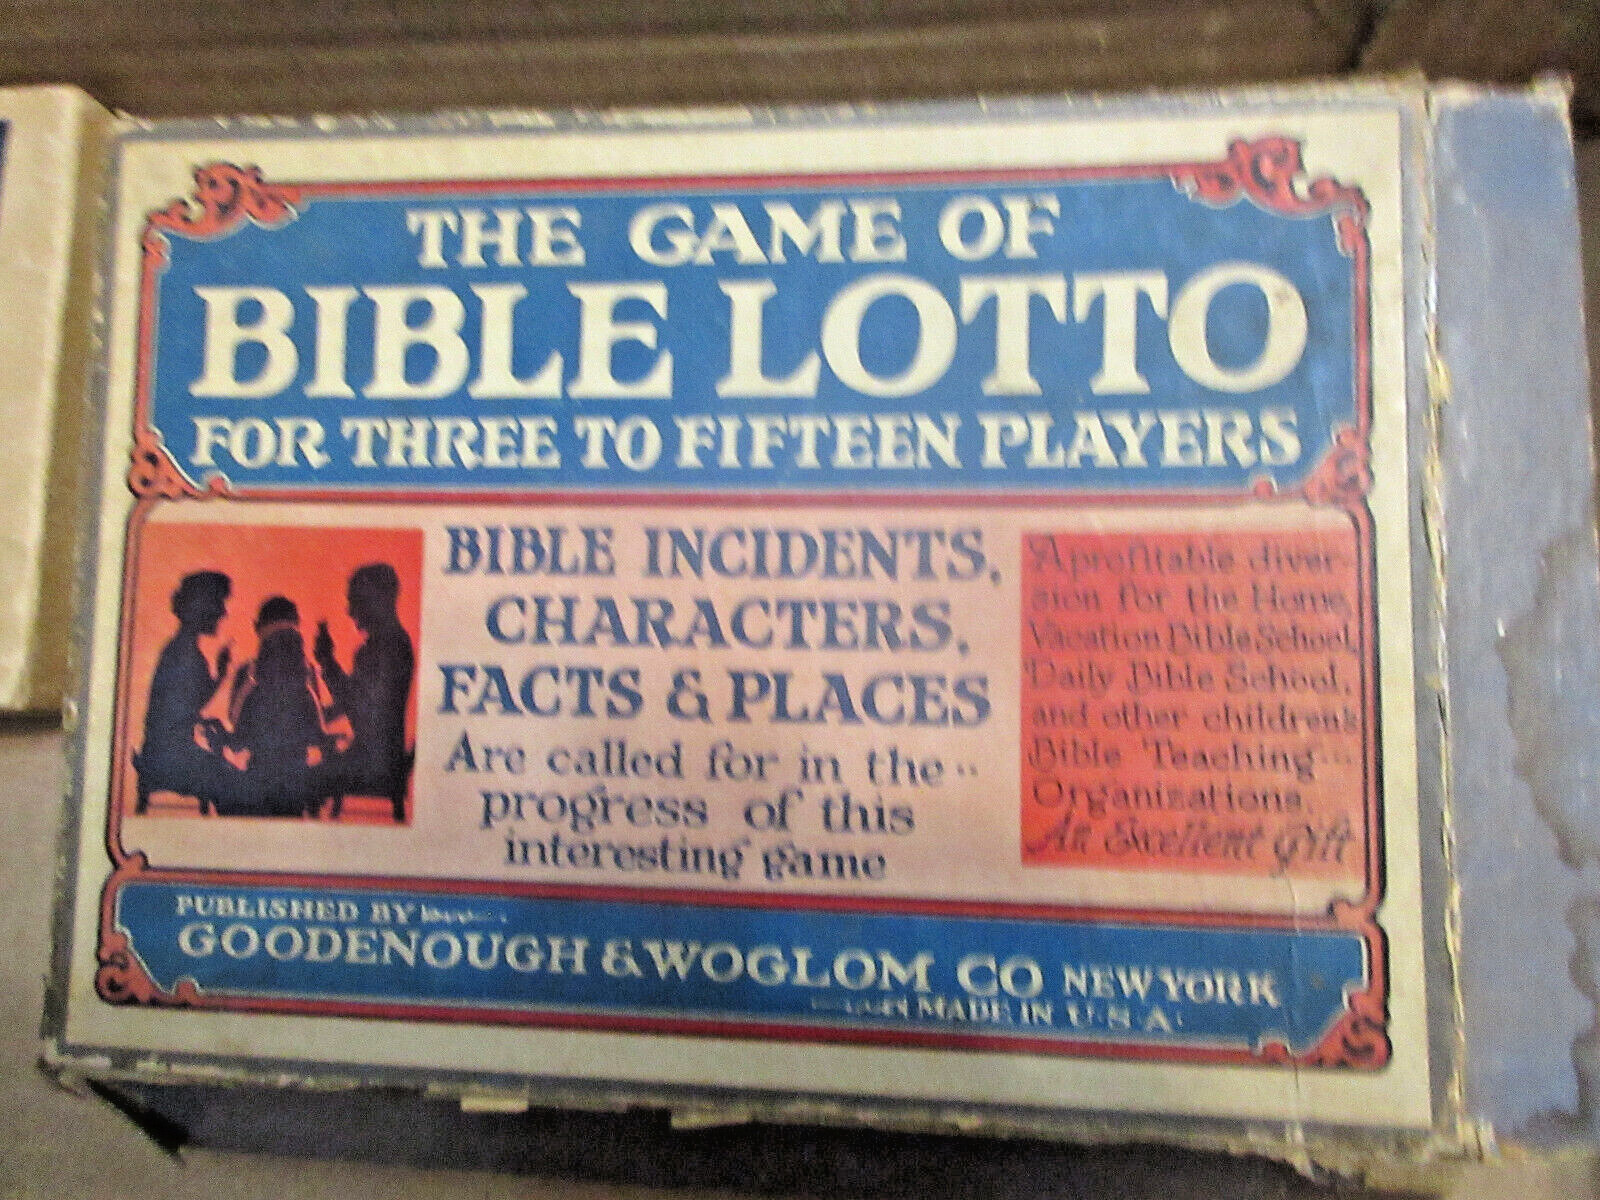 Vintage Christianity Game Bible Lotto, Bible Incidents, Characters, Facts